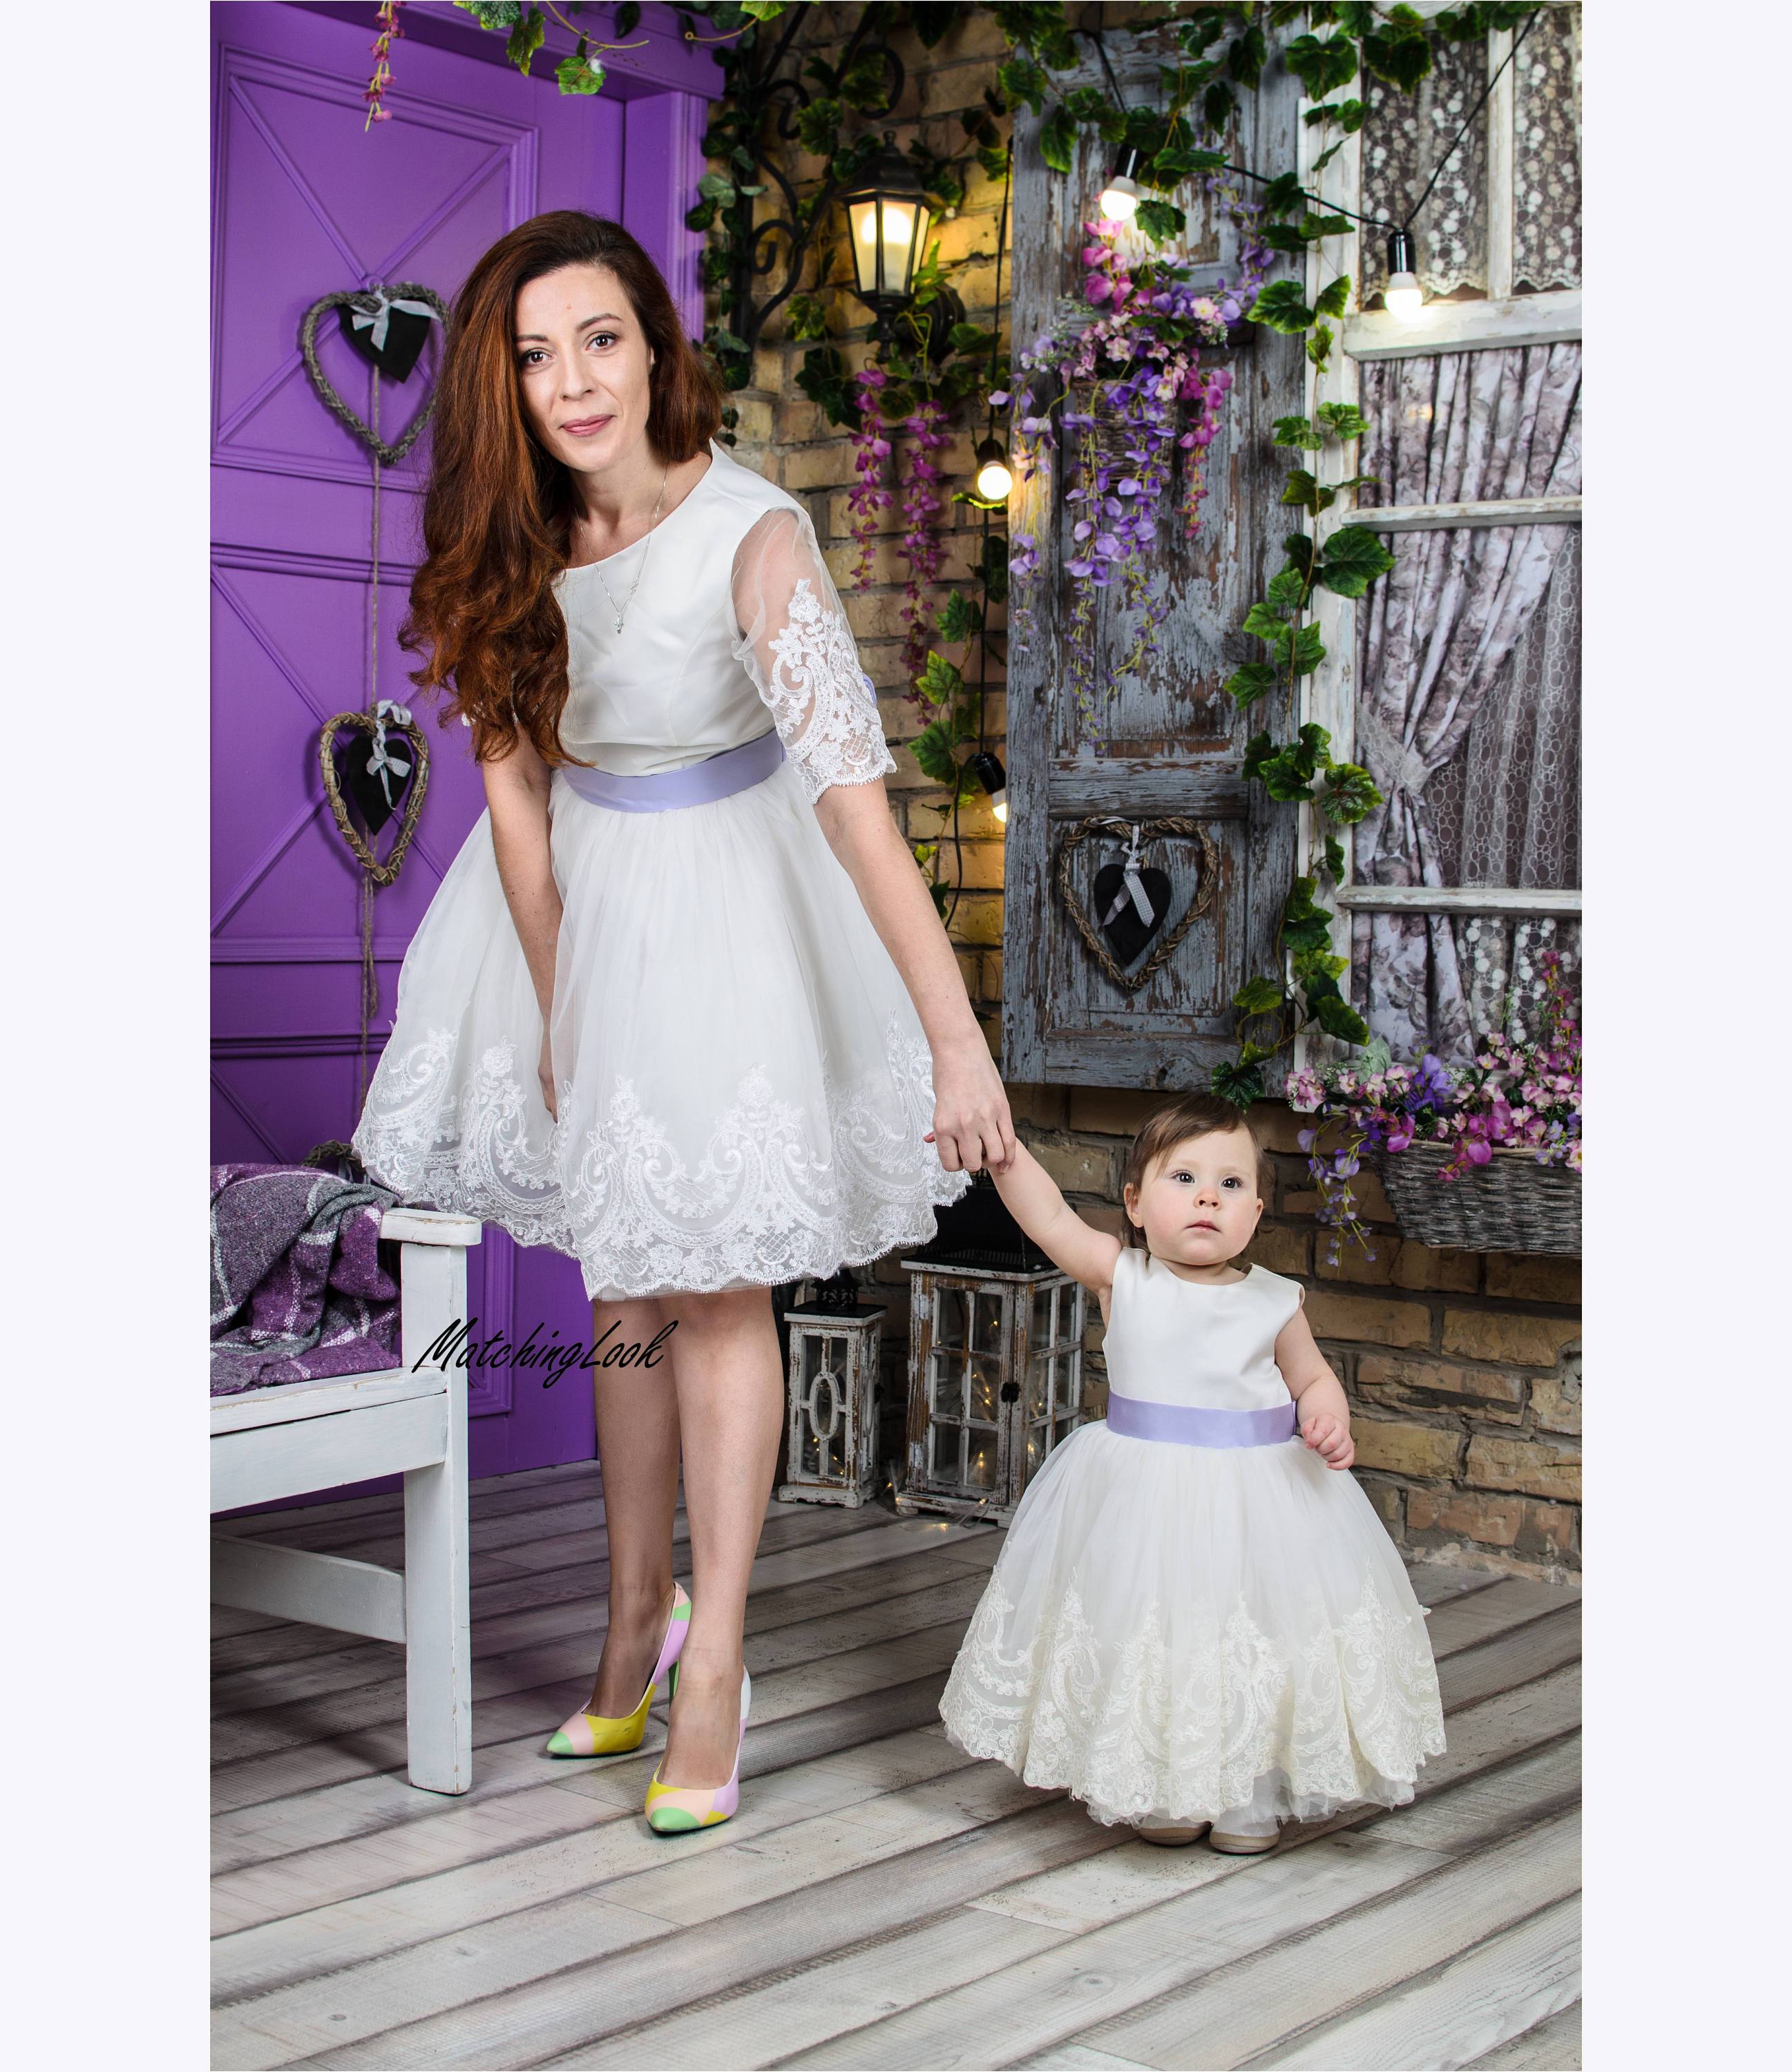 MOTHER & DAUGHTER matching dresses - Stylin by Aylin